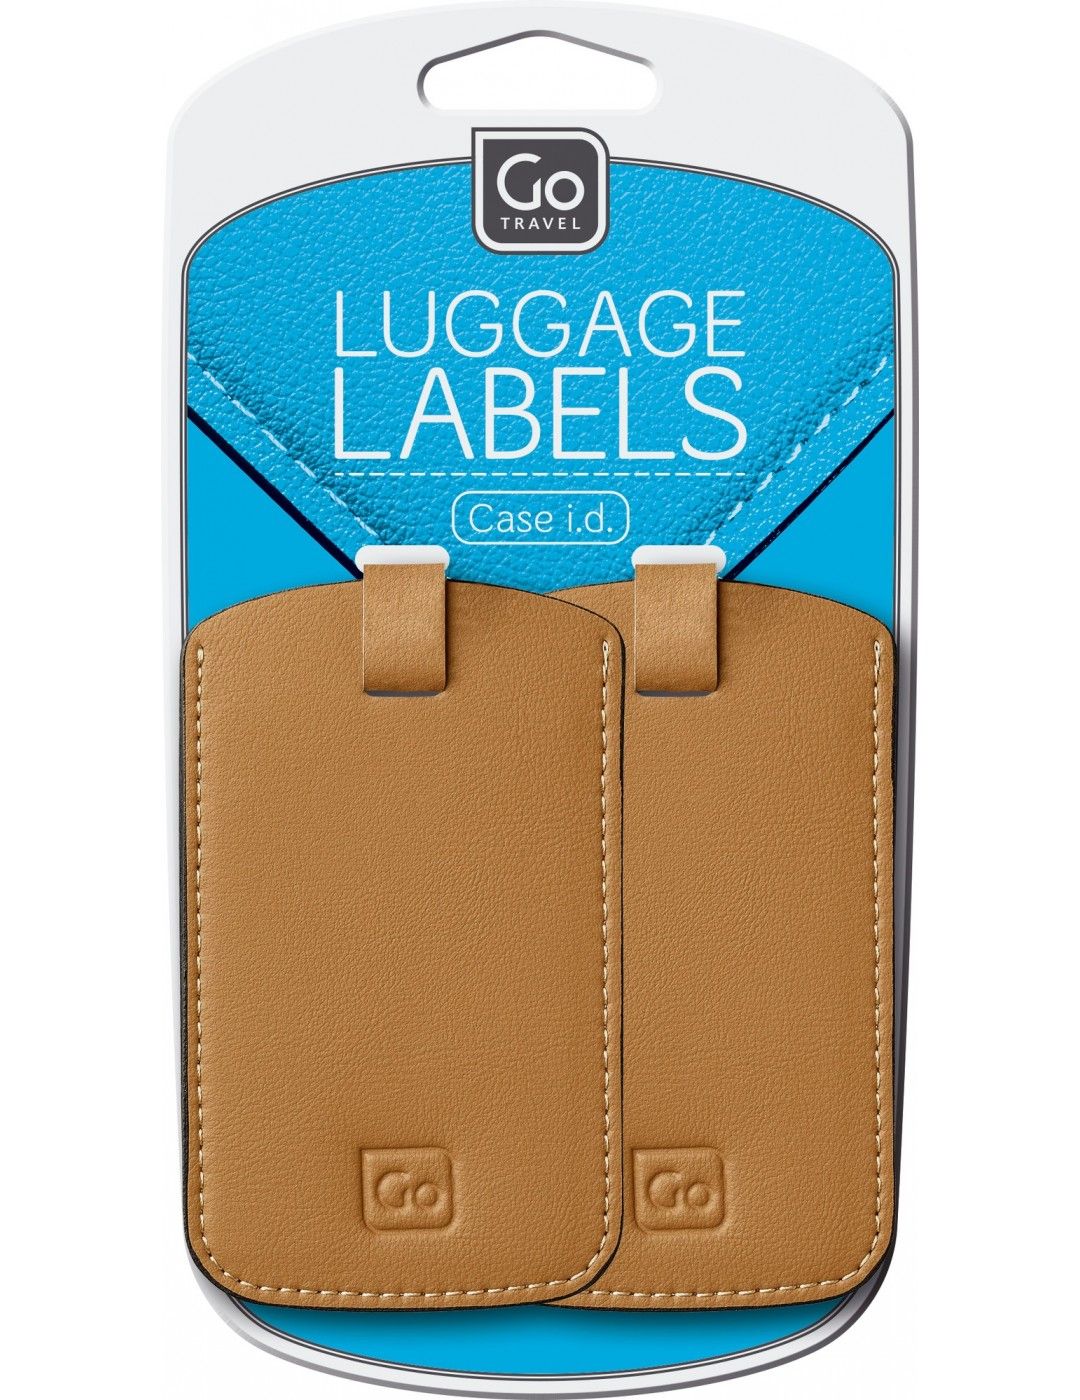 Go Travel Luggage Labels Real Leatherette 2 Pieces